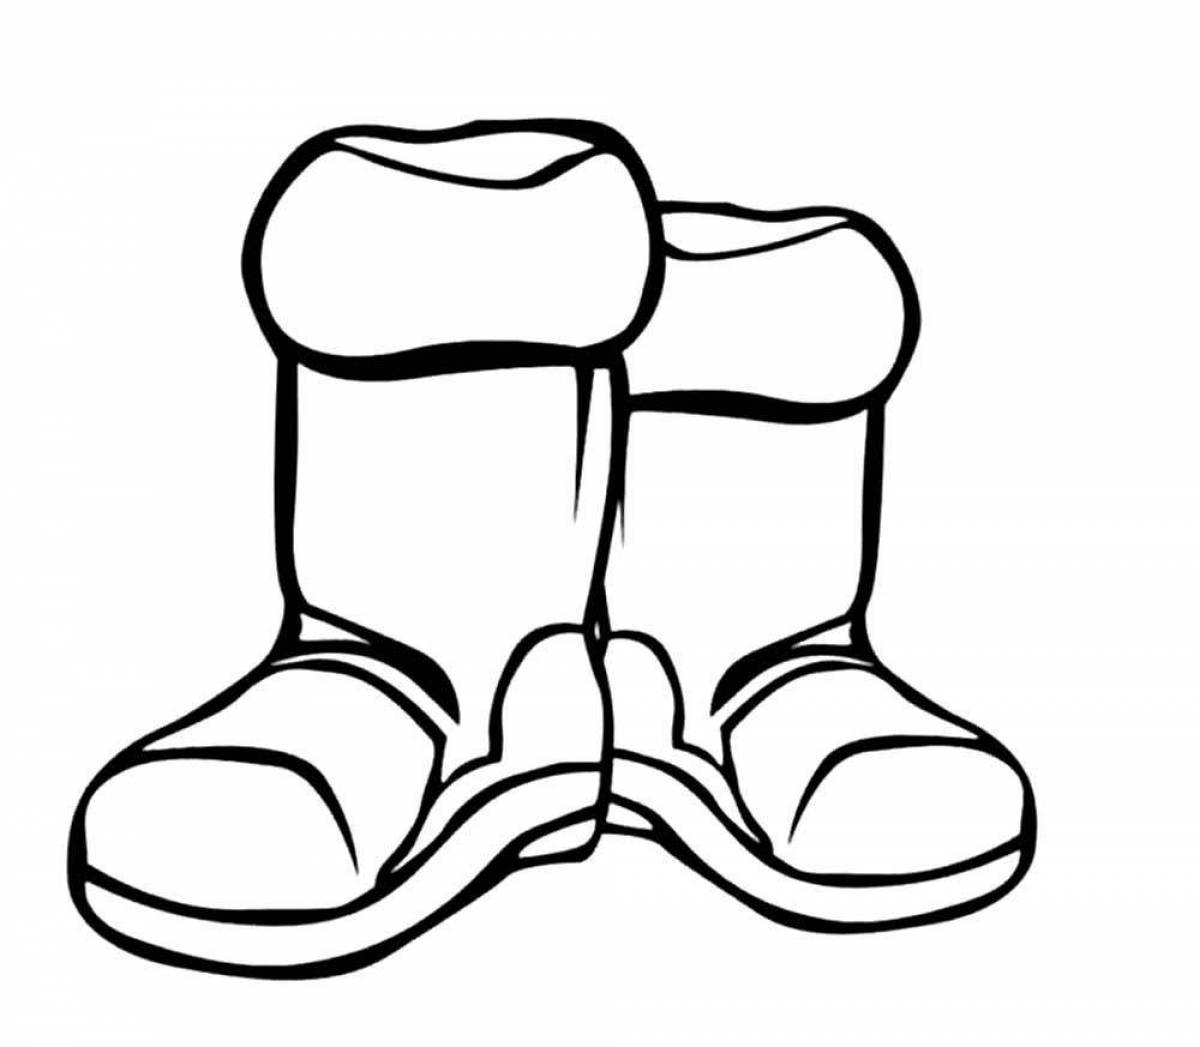 Gorgeous boots coloring page for kids